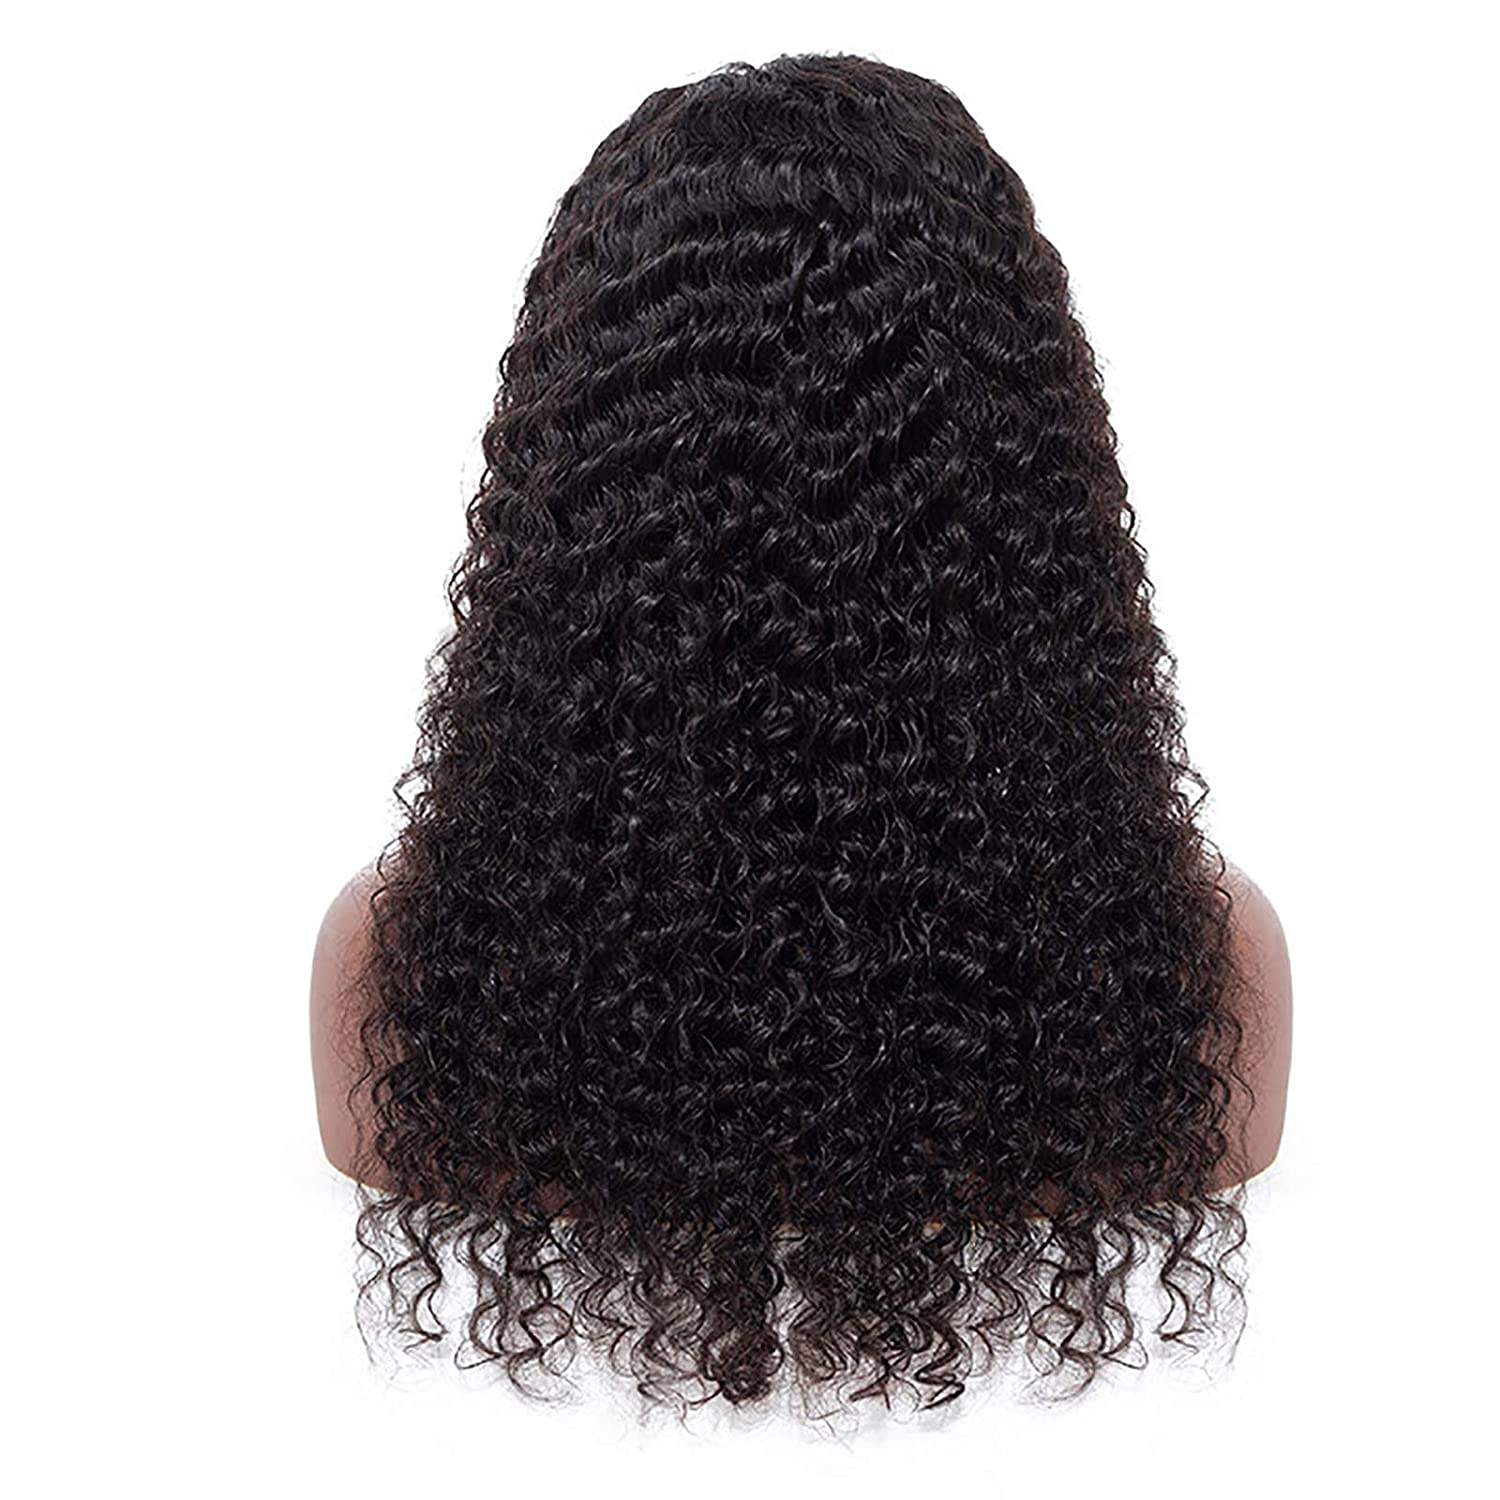 Gluna Hair 4x4 Lace Closure Wigs Deep Curly Brazilian Virgin Human Hair For Black Women Pre Plucked Natural Color